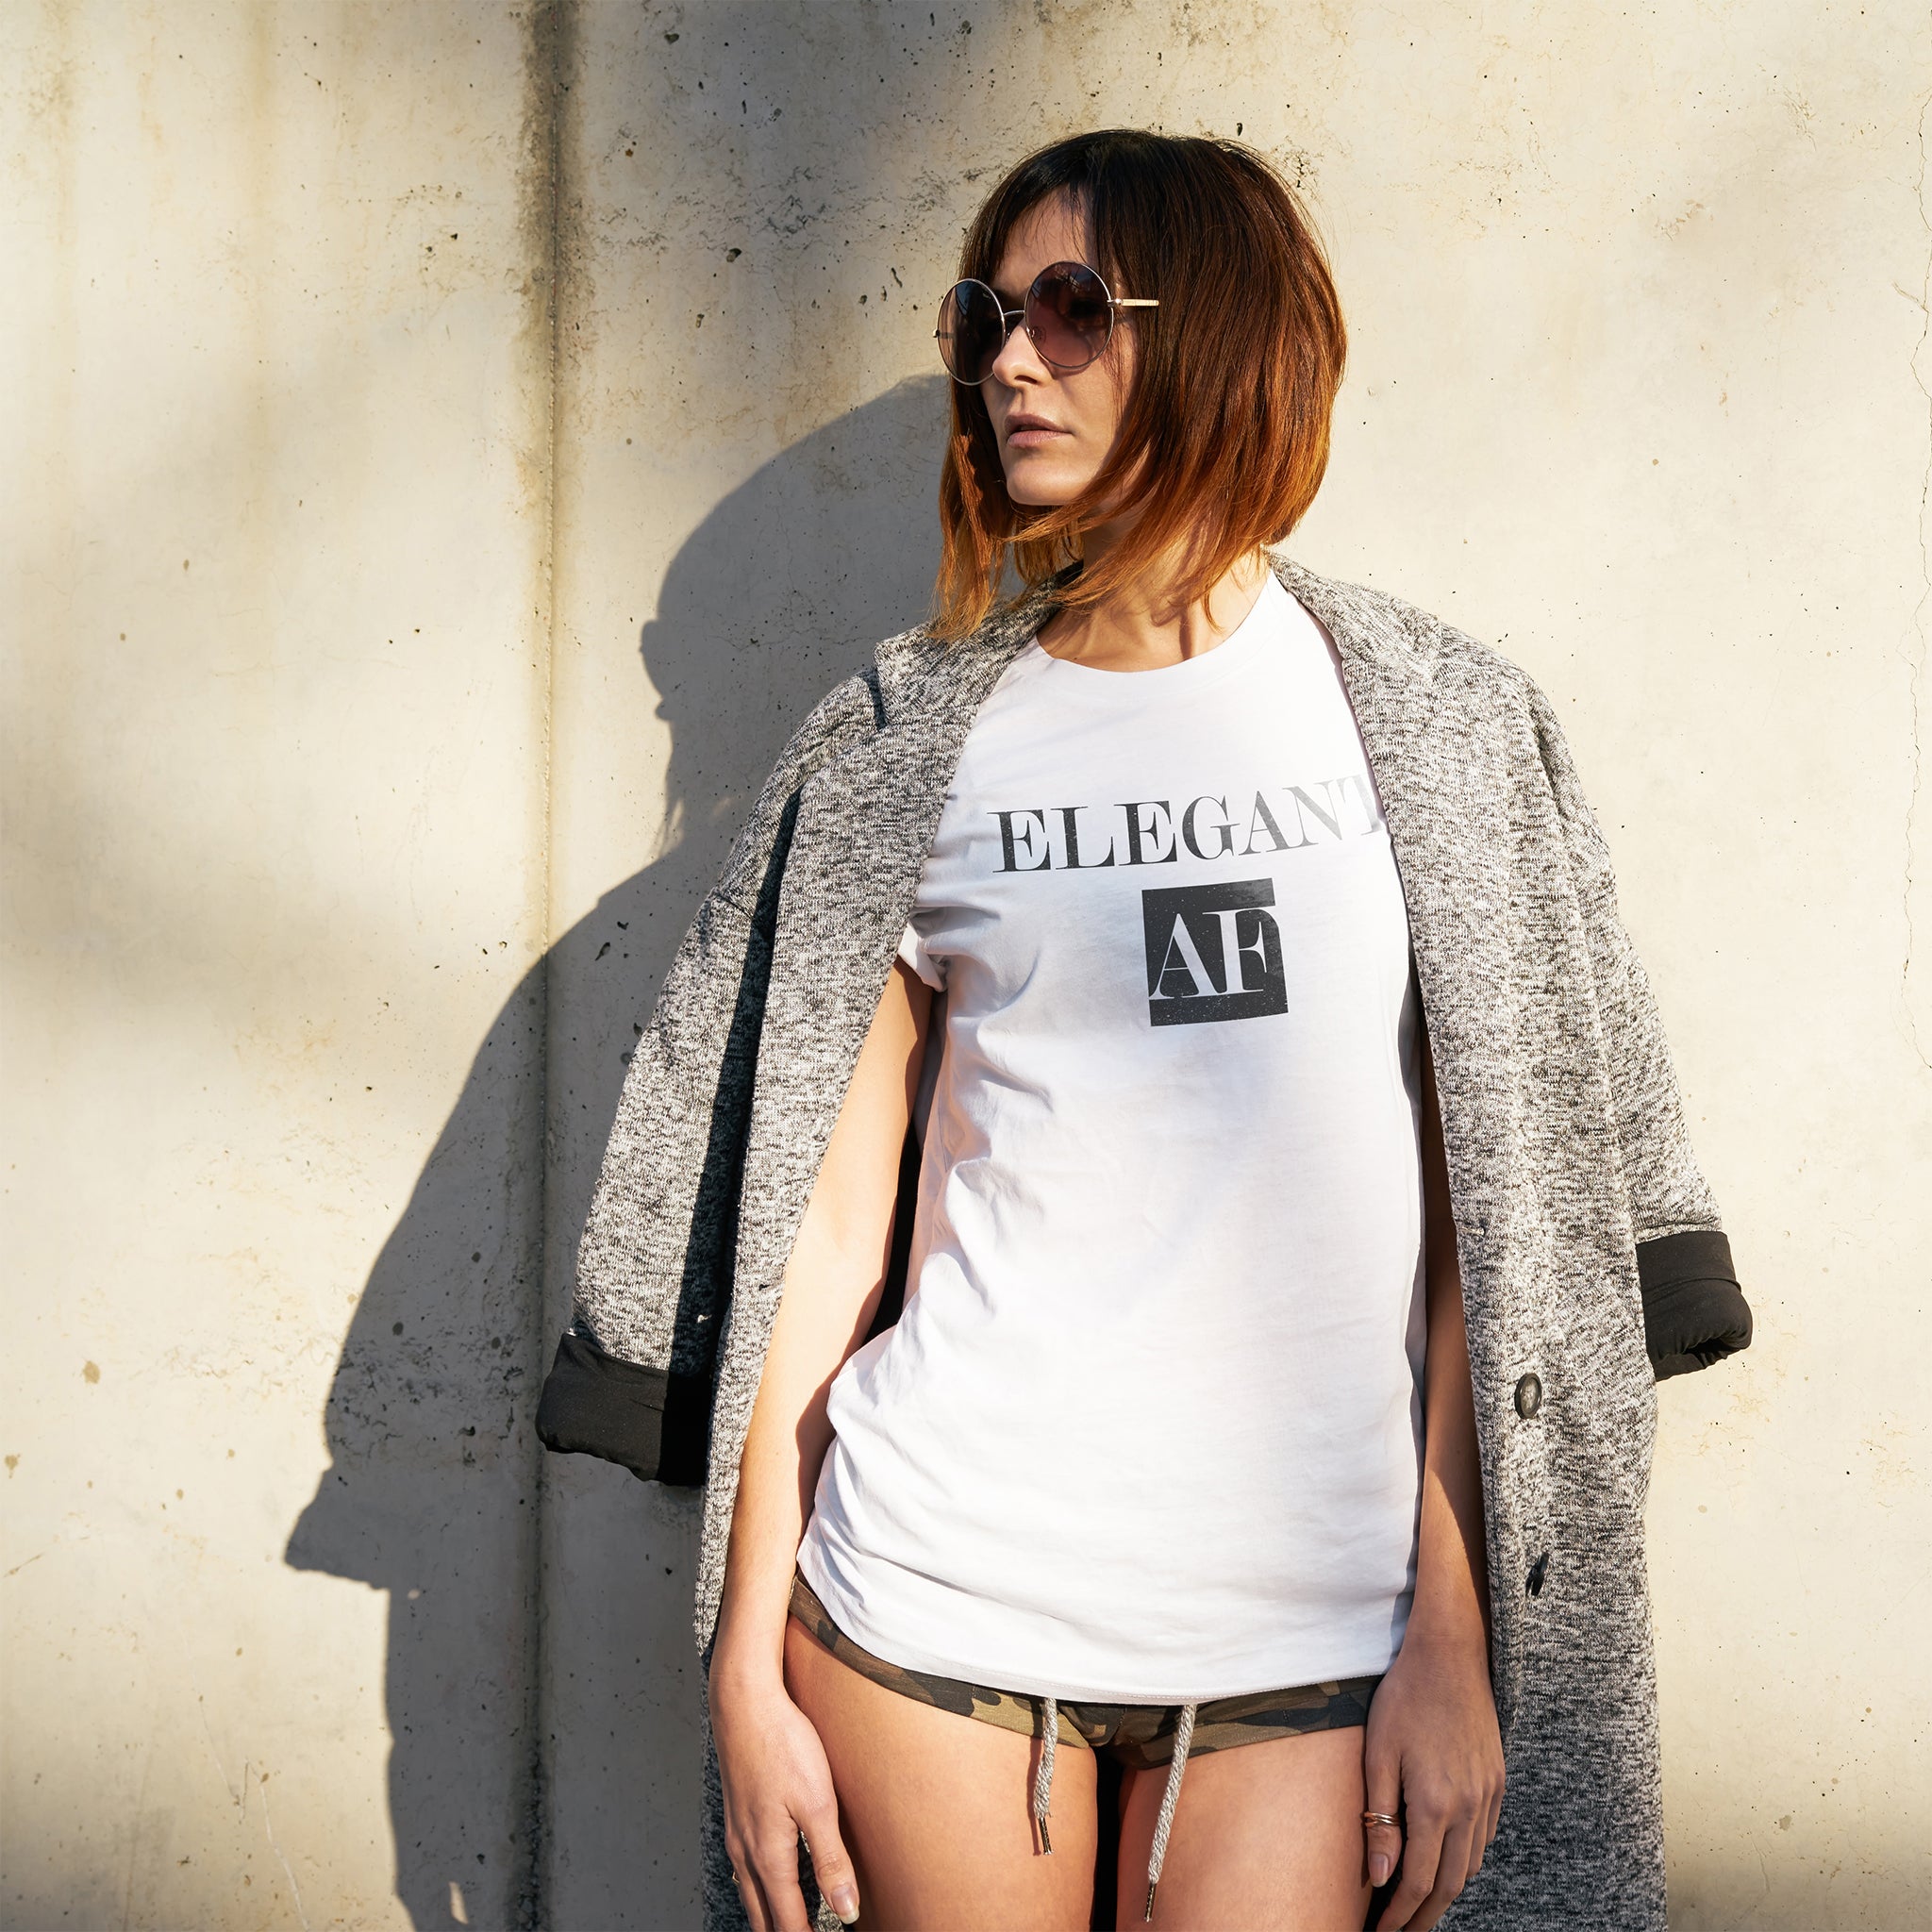 A fashionable young woman wears a stylish t-shirt with the sarcastic, meme-influenced typographic “ELEGANT AF” under a coat, in dappled sunlight. By fashion brand YUF, from wolfsaint.net